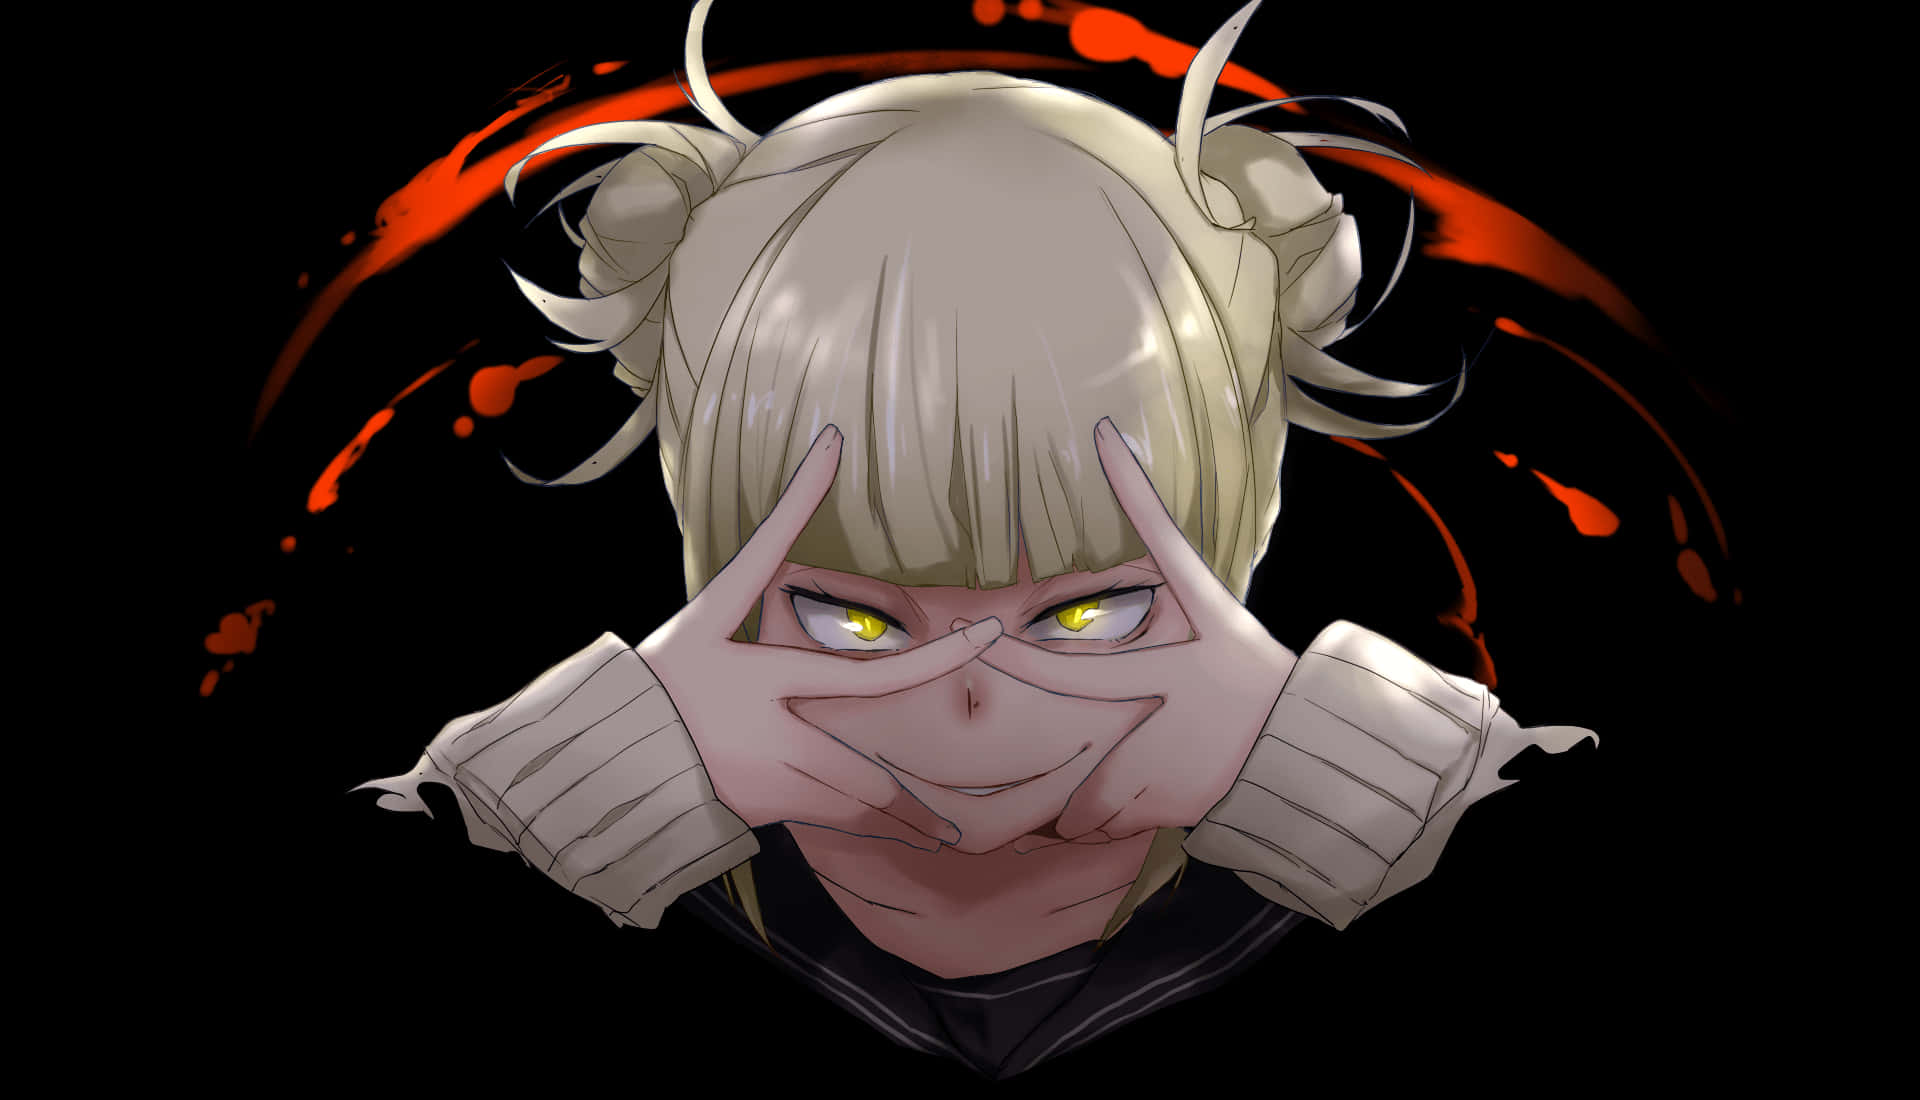 Himiko Toga Aesthetic With Blood Stains Wallpaper